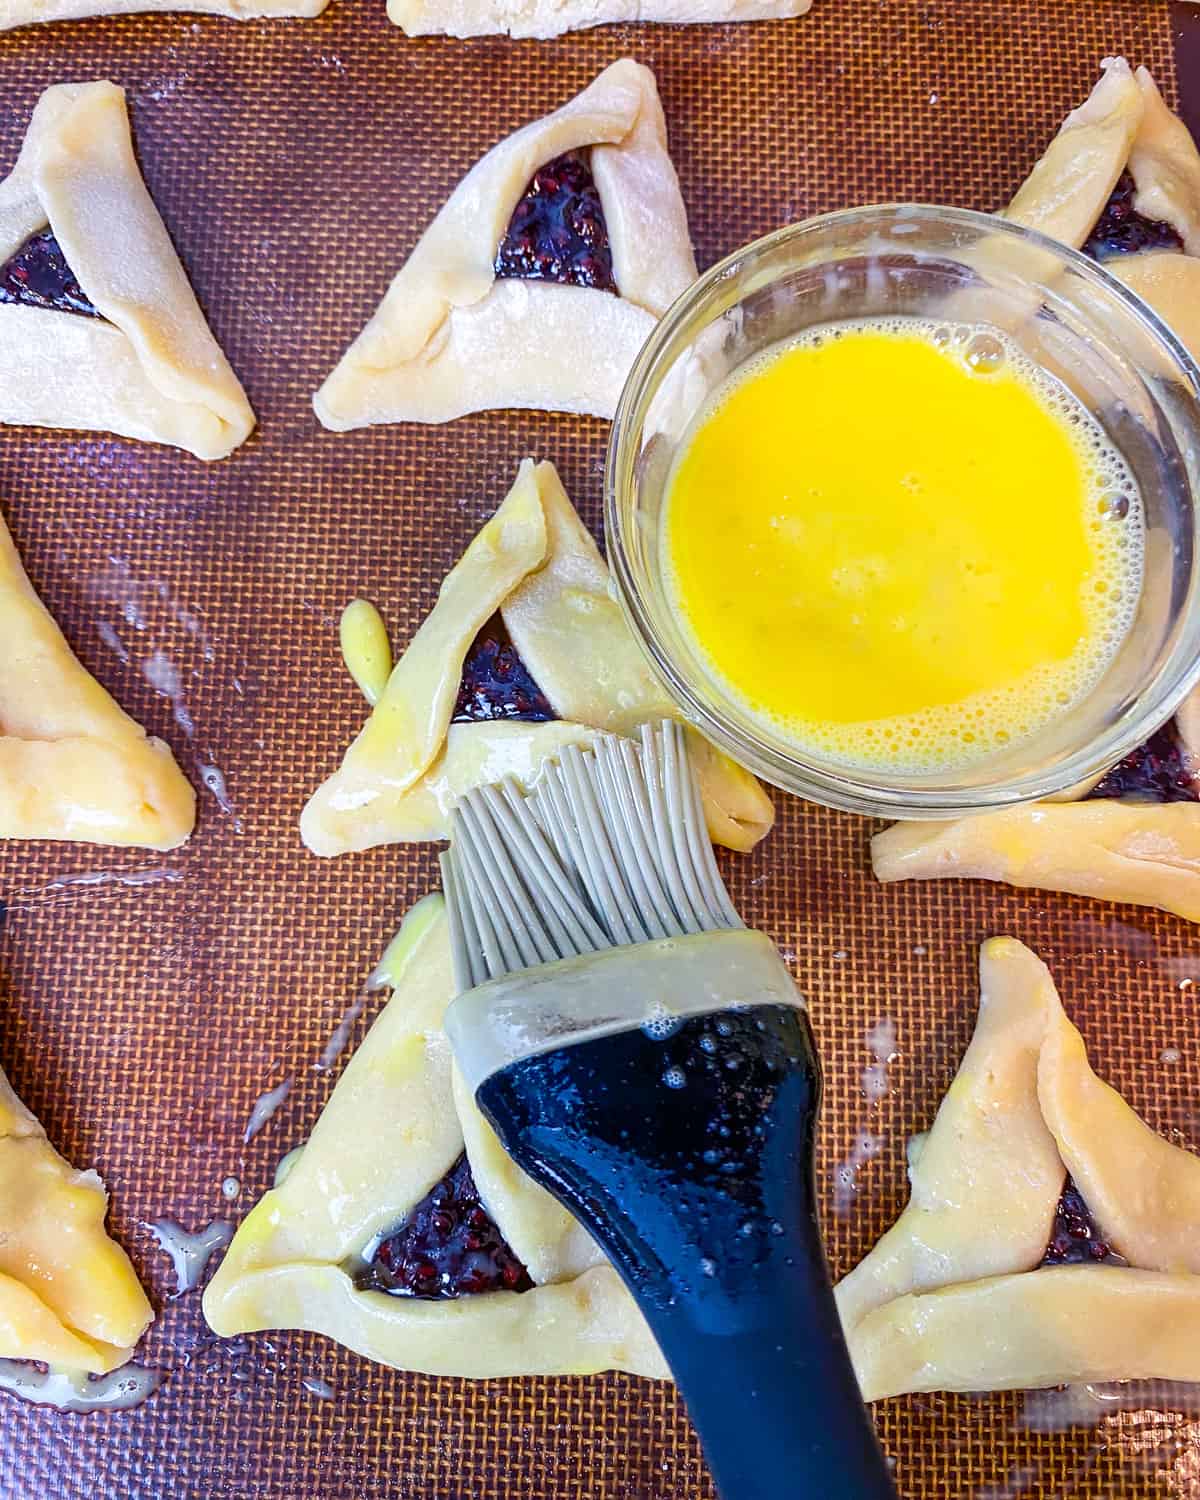 Brush the hamantaschen cookies with egg wash before baking.